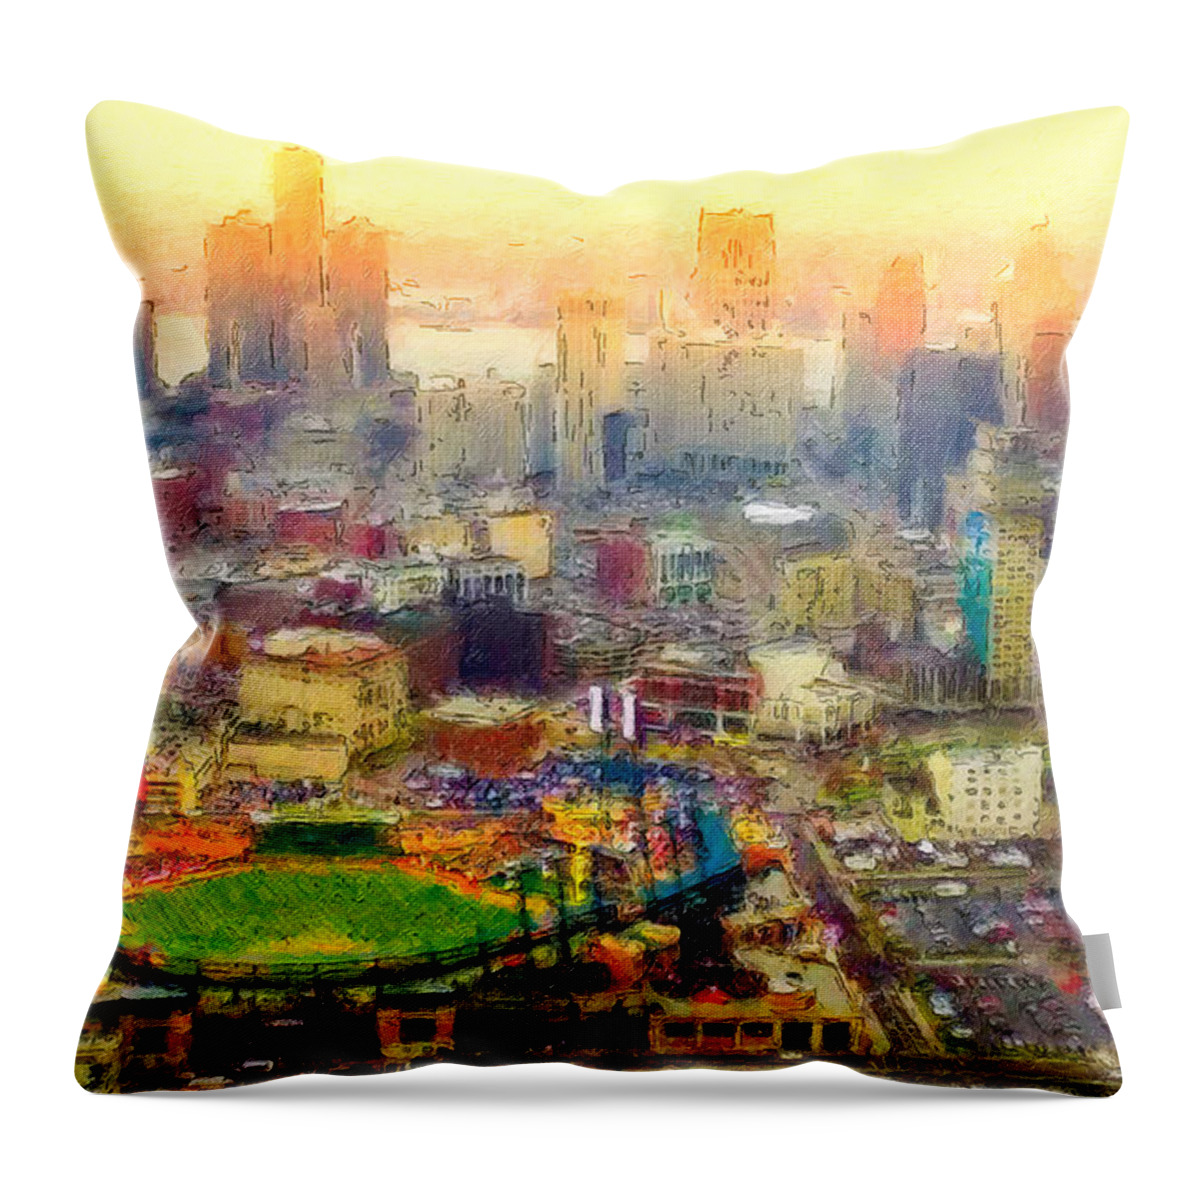 Comerica Throw Pillow featuring the painting Haze Over Comerica by John Farr